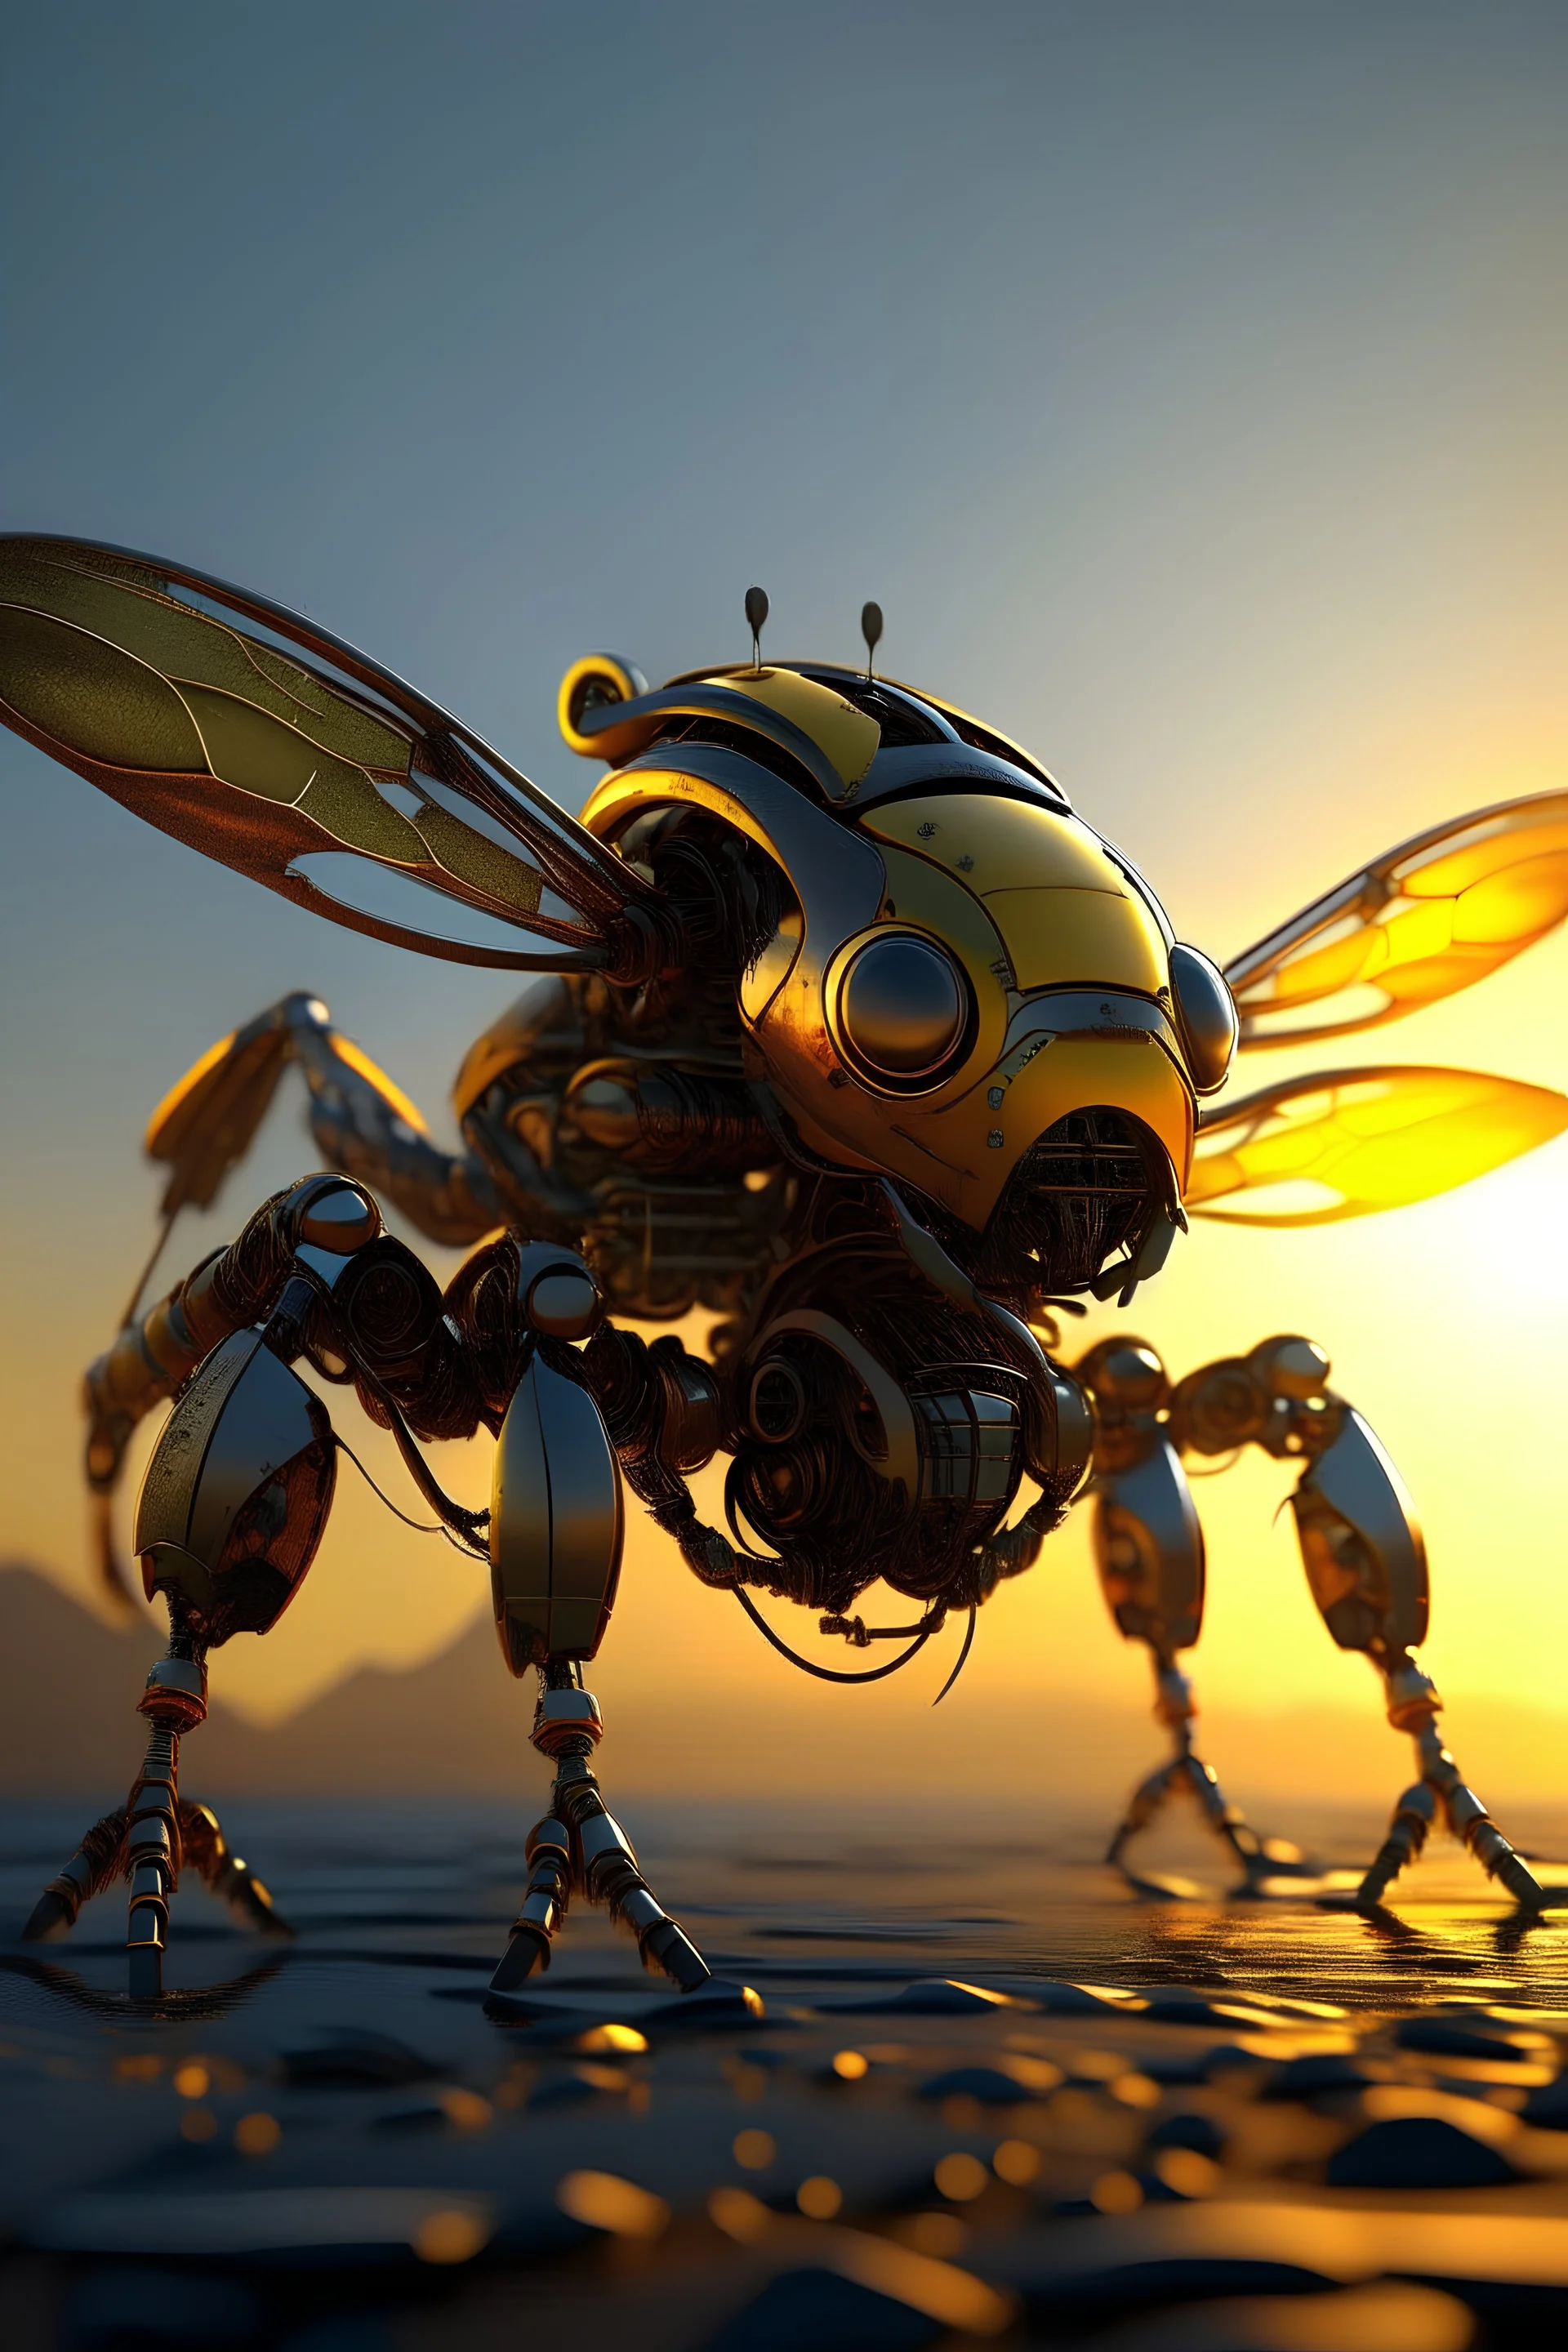 Robot bee, mechanical, close-up, intricate details, surreal, 3D rendering, parked on the ground, sunrise, wings spread, science fiction